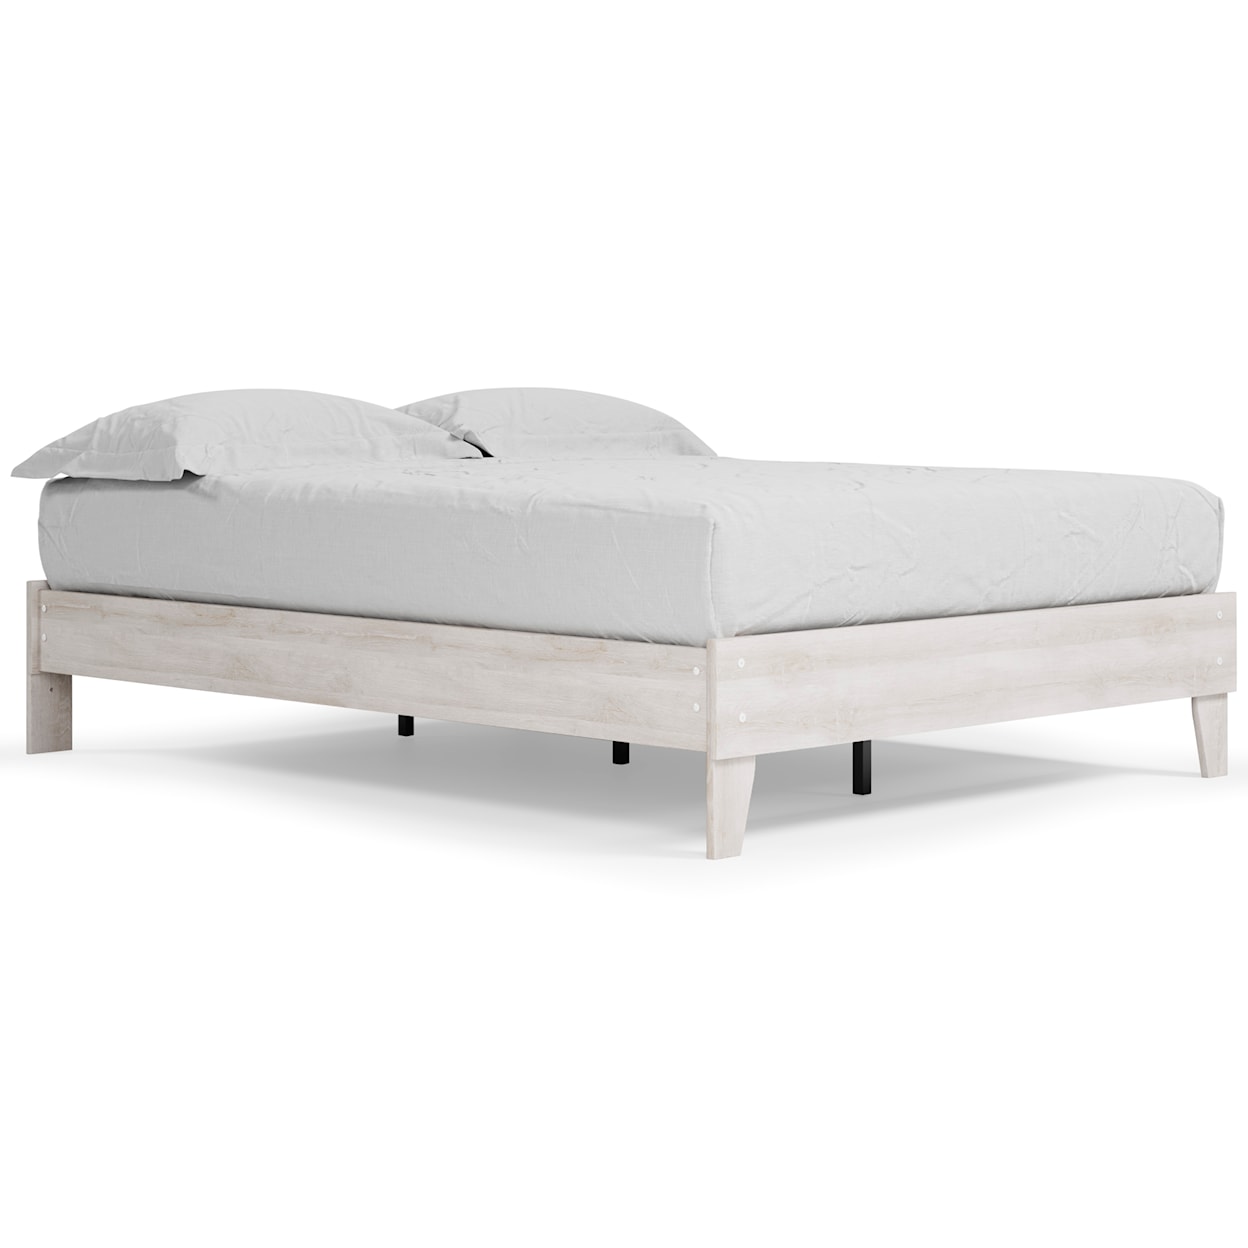 Signature Design by Ashley Paxberry Queen Platform Bed